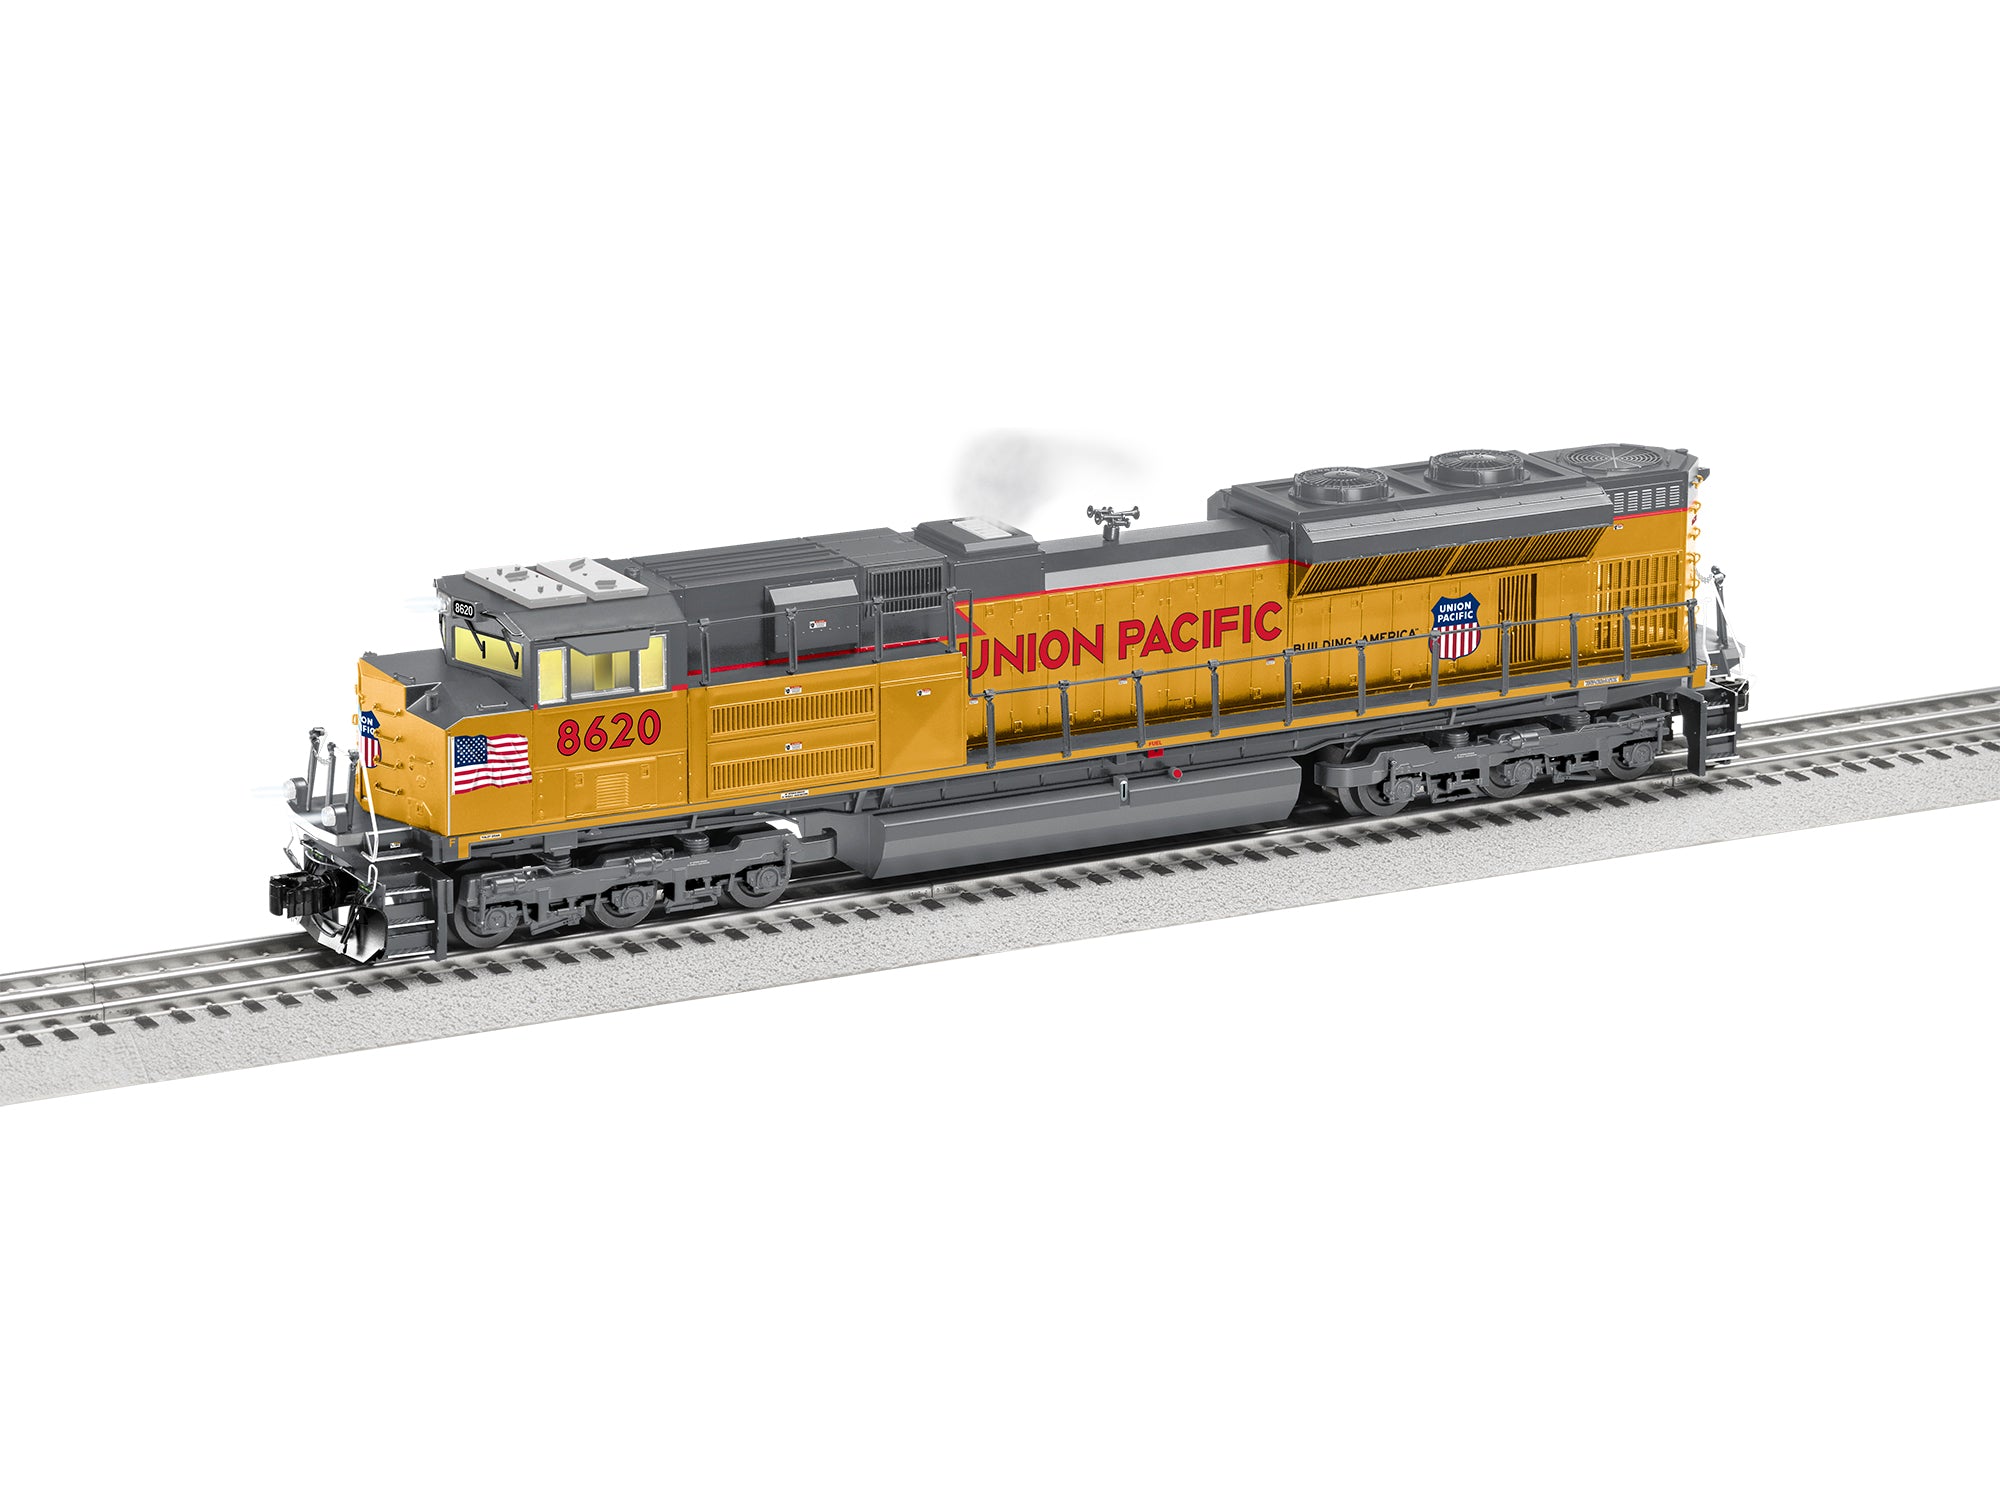 Lionel 2433032 - Legacy SD70ACE Diesel Engine "Union Pacific" #8620